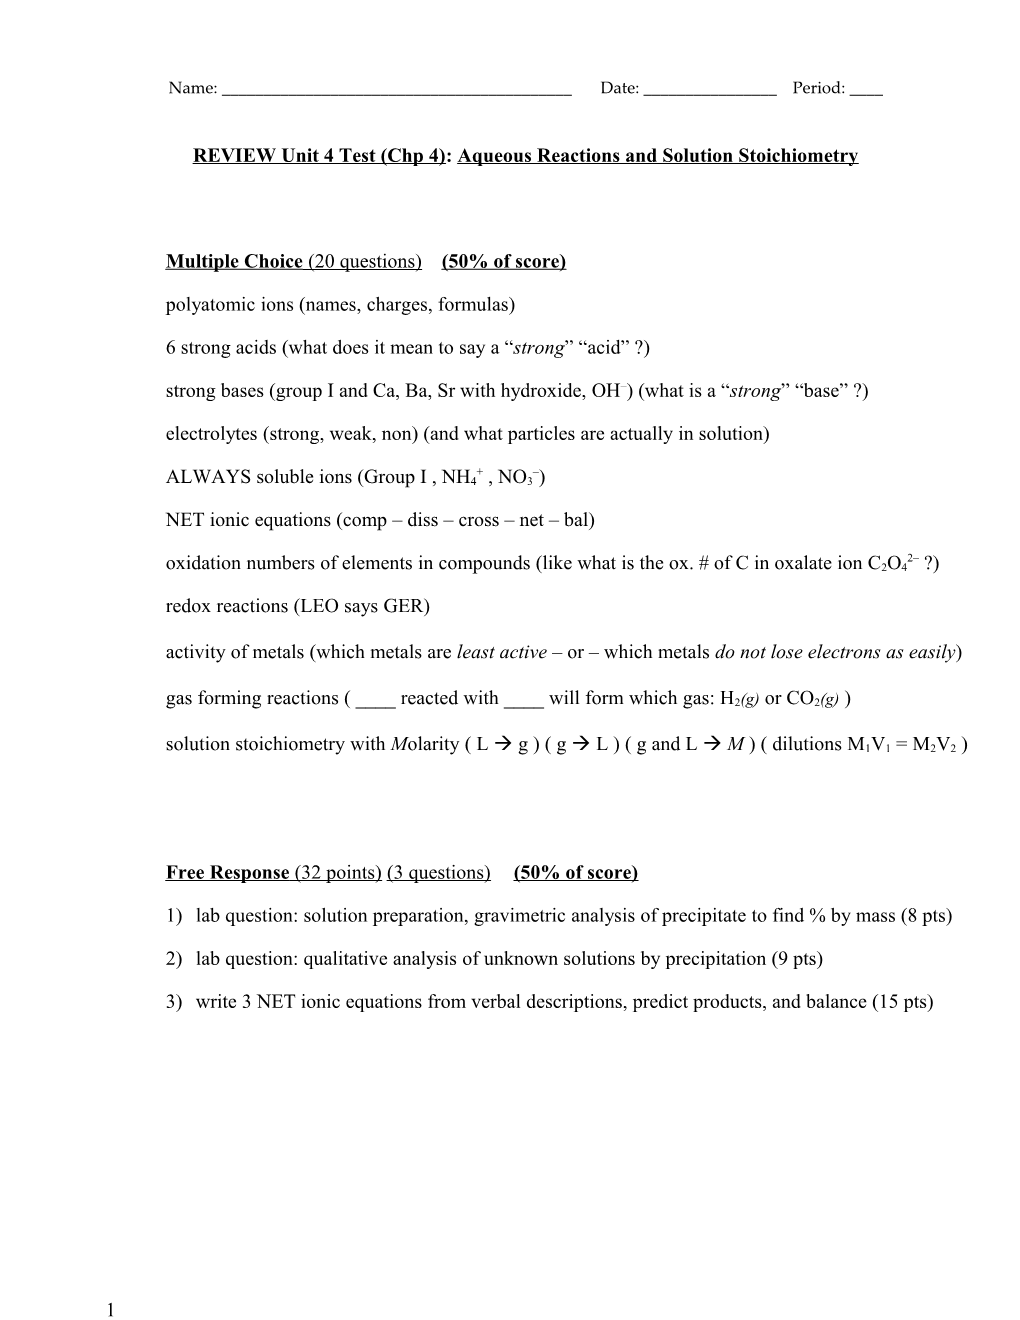 Reviewunit 4 Test(Chp 4): Aqueous Reactions and Solution Stoichiometry